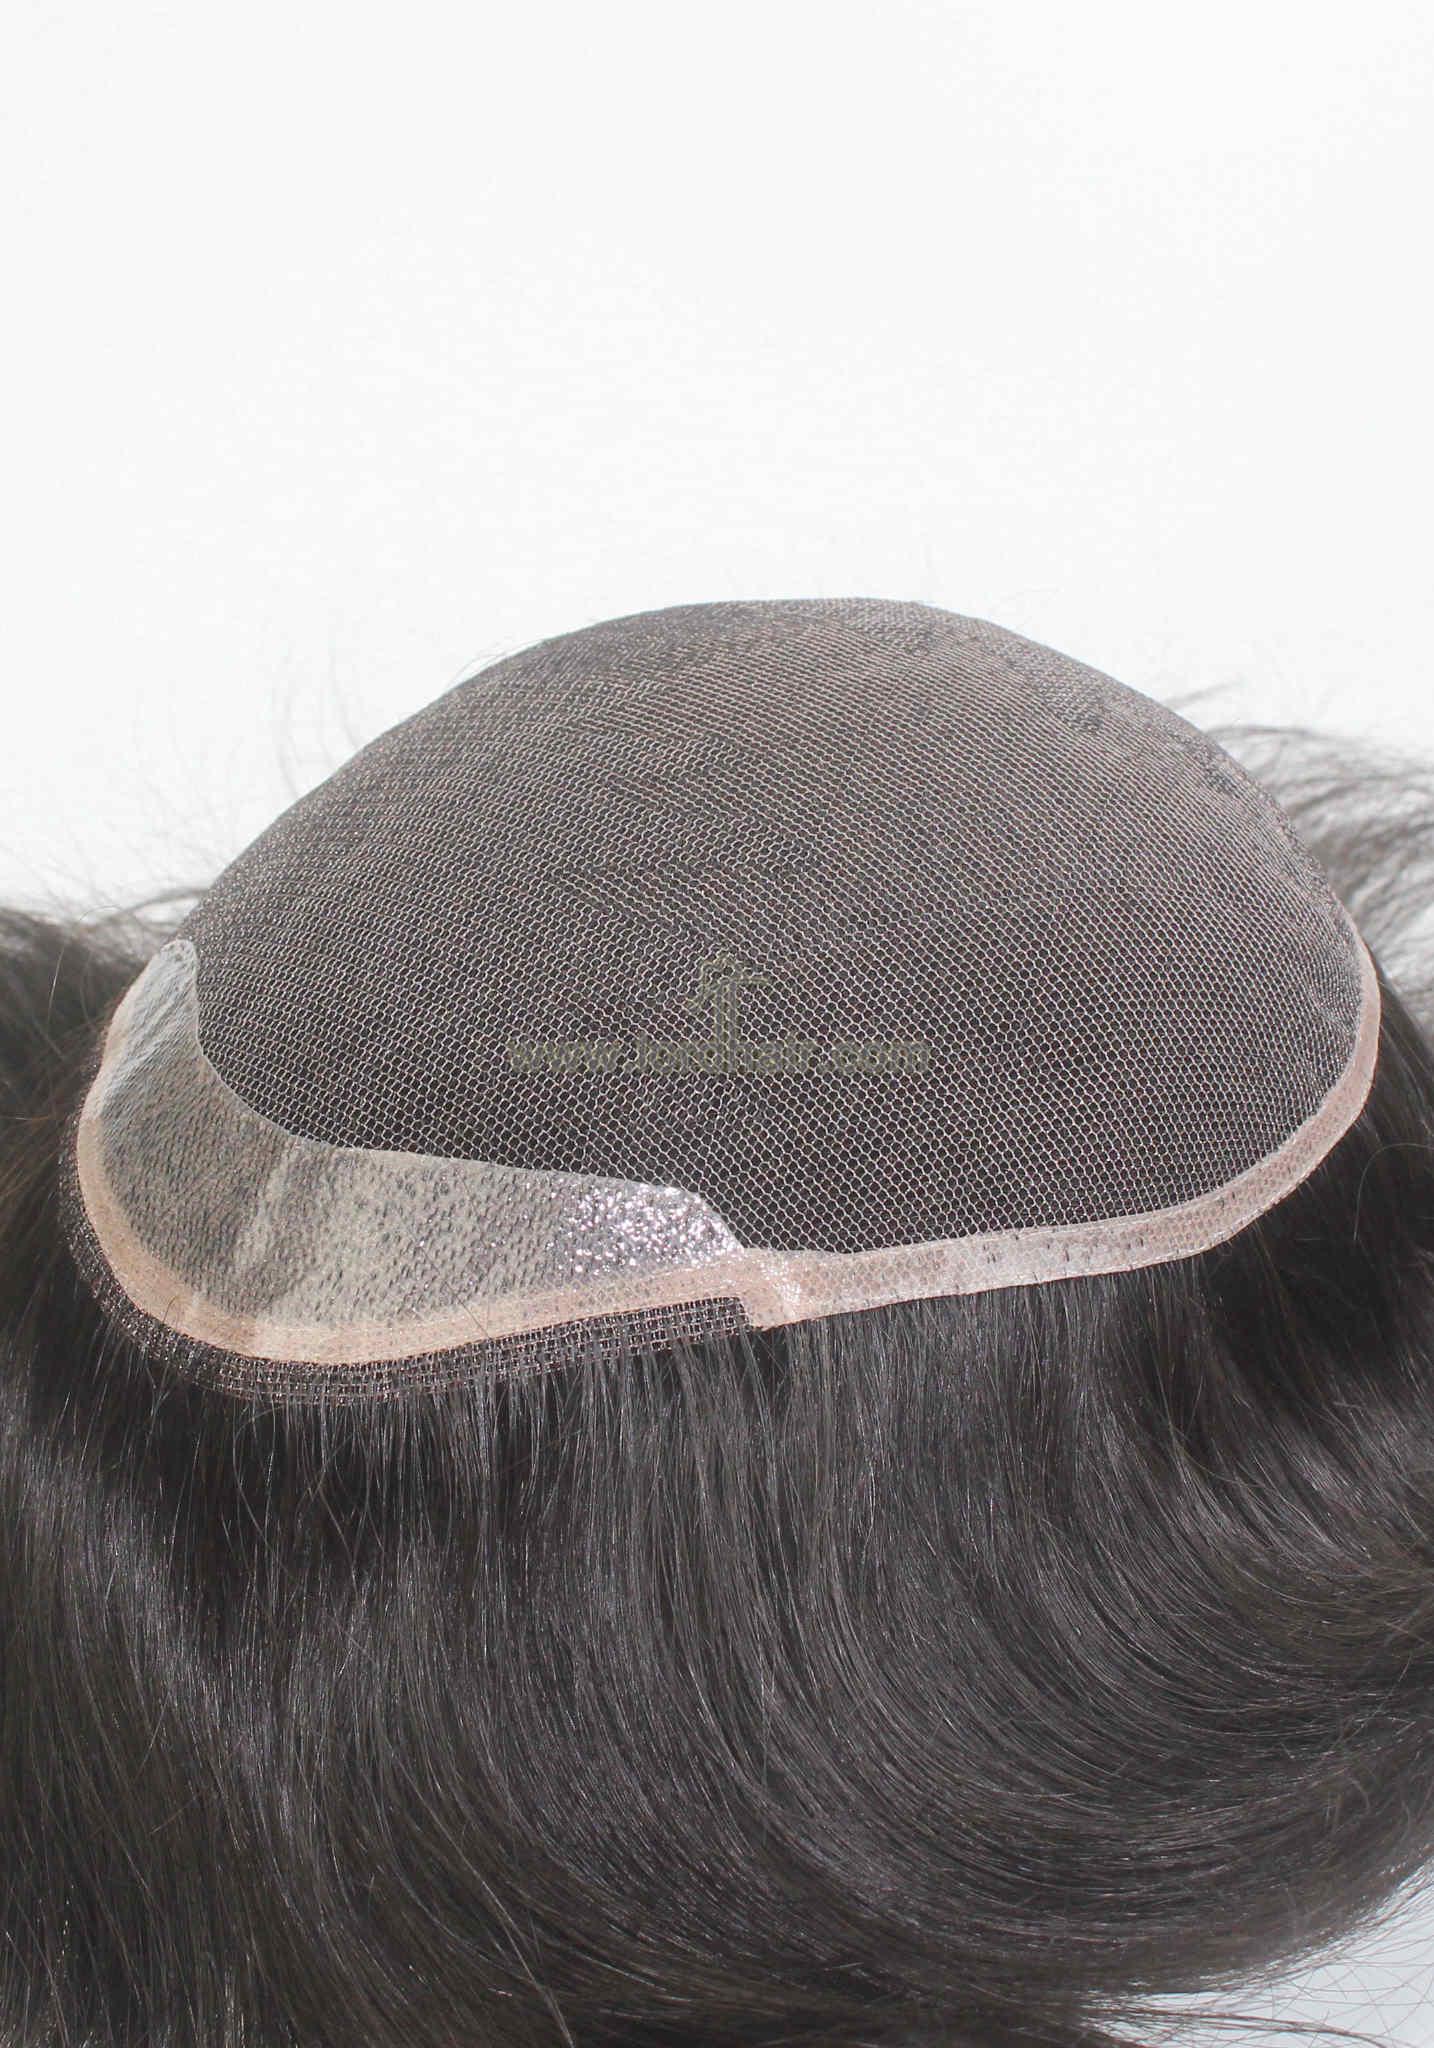 YJ1251: Durable German Net PU and Lace Front Human Hair Men's Toupee